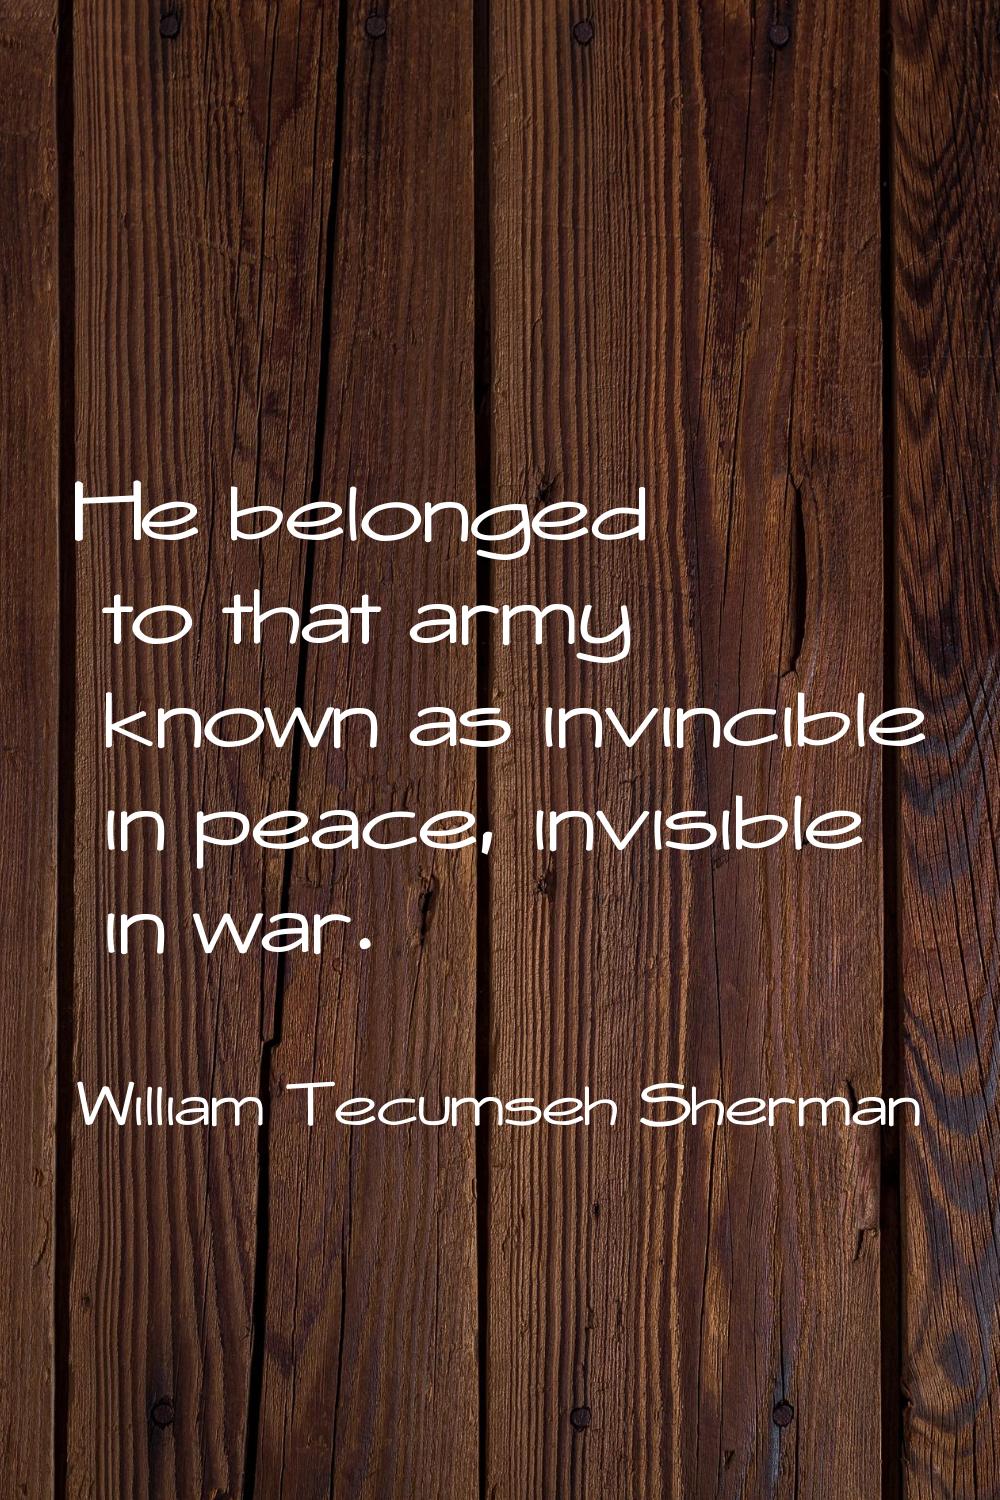 He belonged to that army known as invincible in peace, invisible in war.